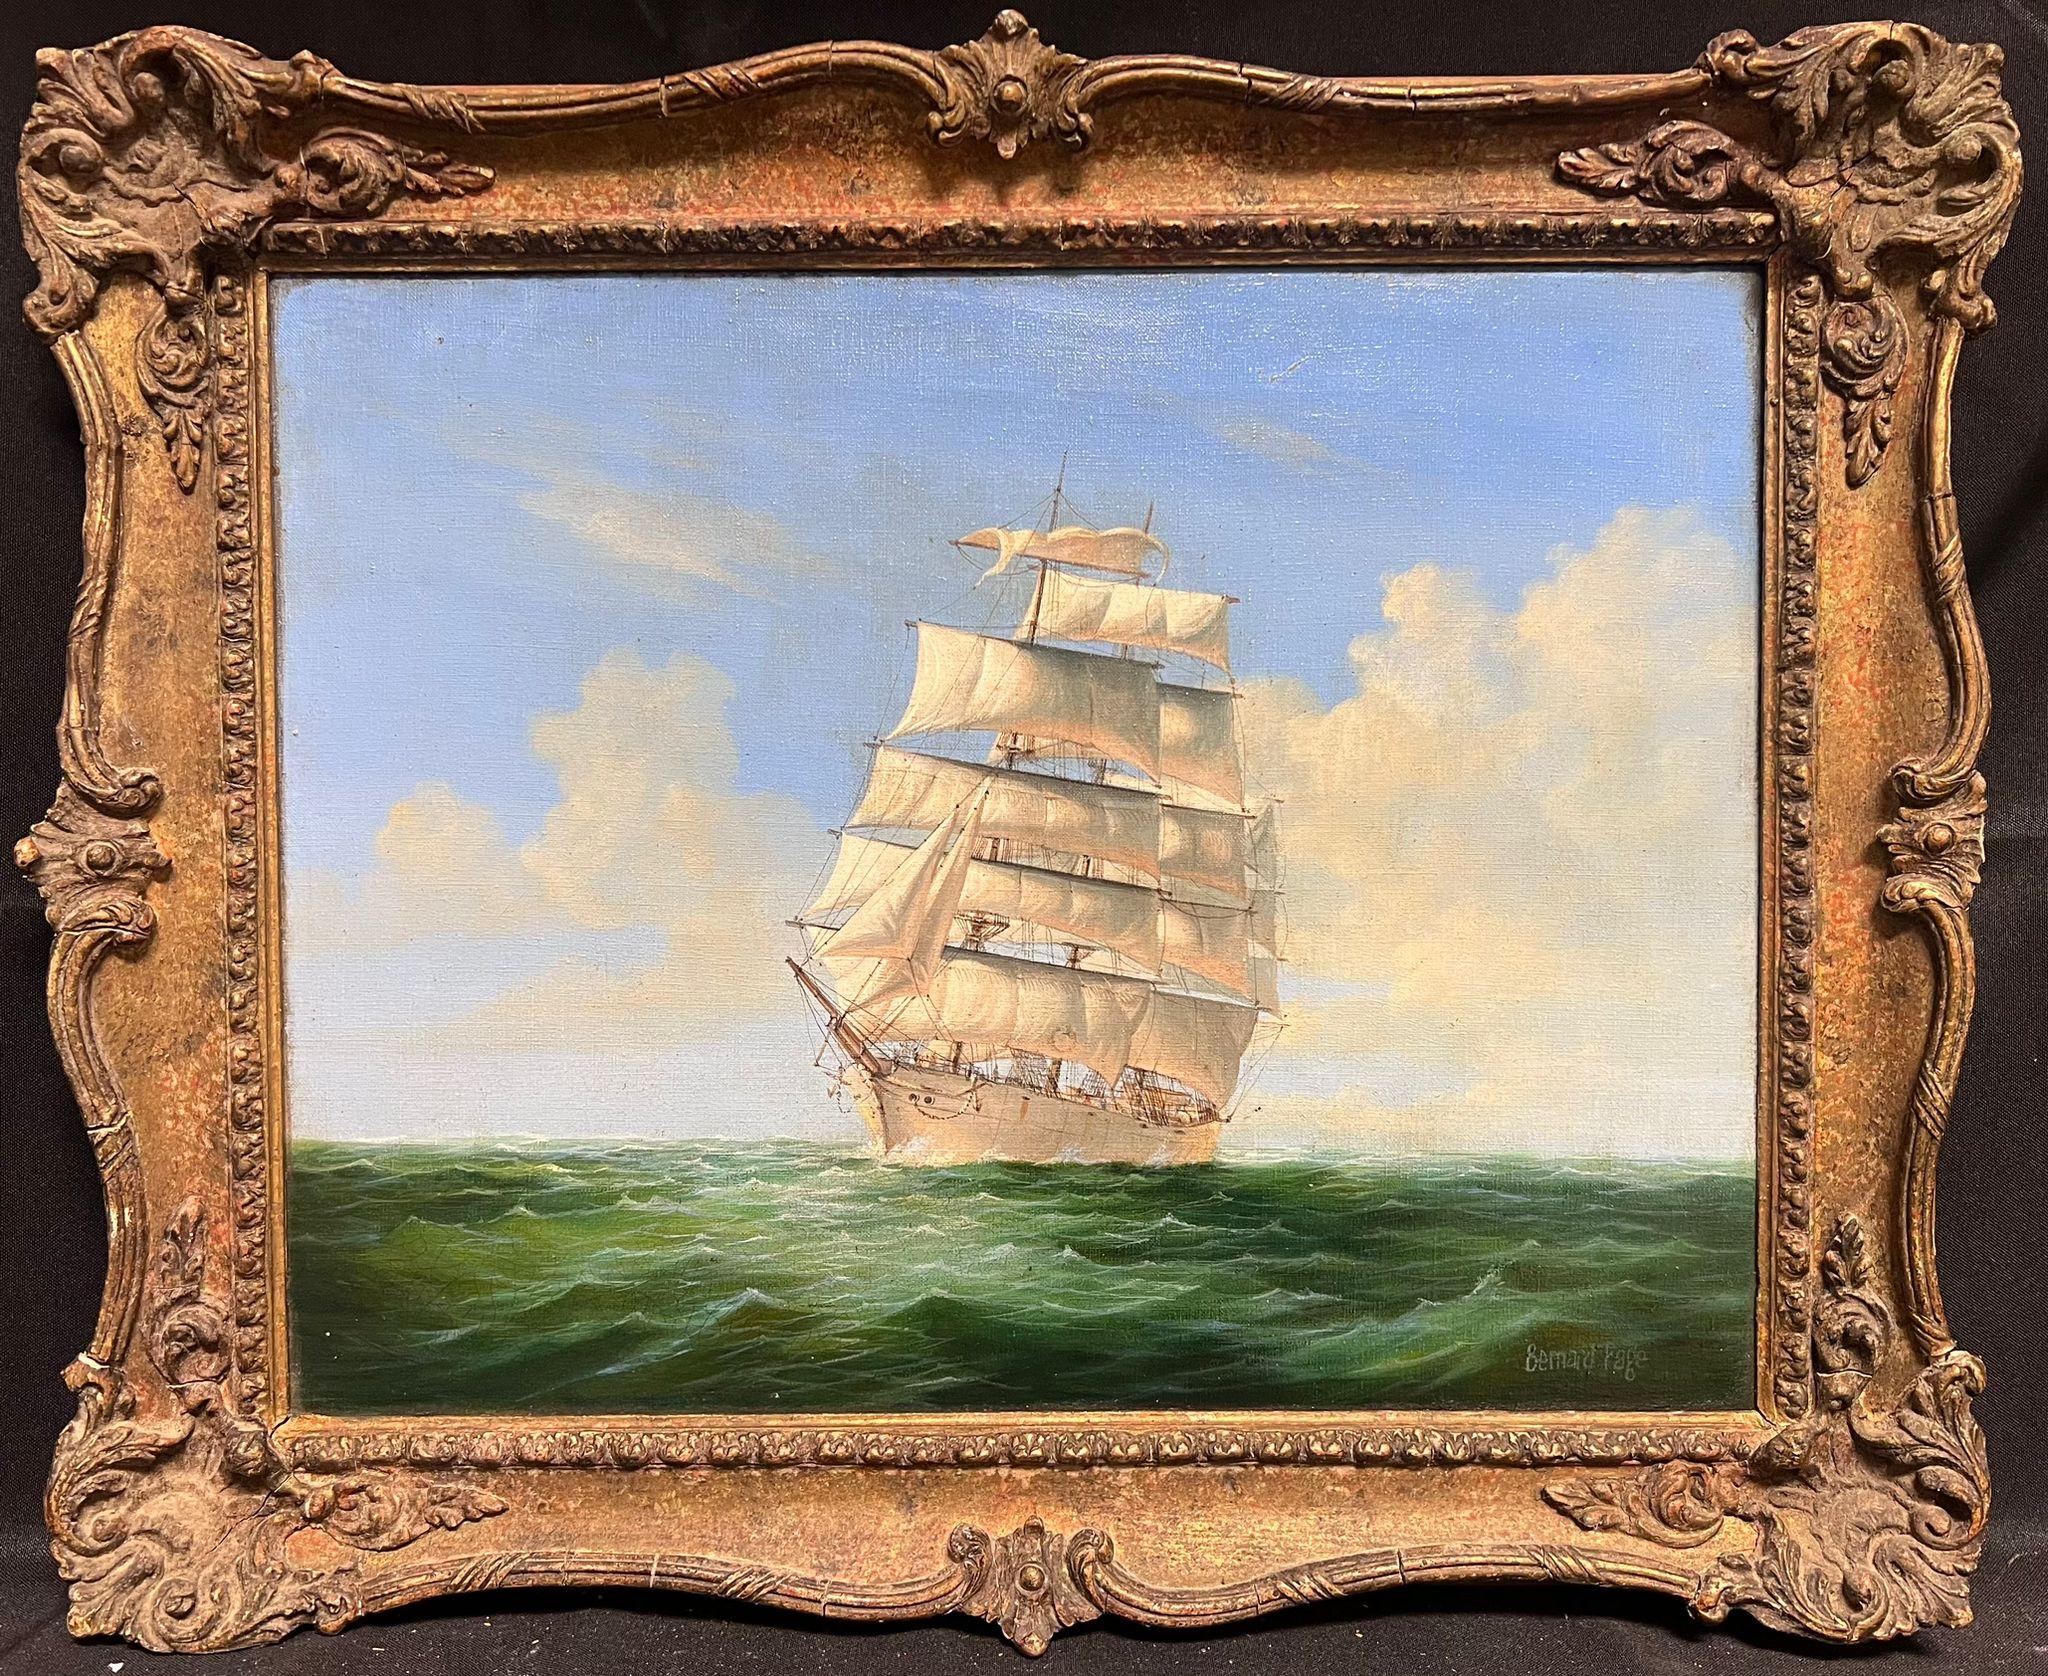 Bernard Page Landscape Painting – Classic Tall Sailing Ship on Turquoise Seas Signed Original British Oil Painting